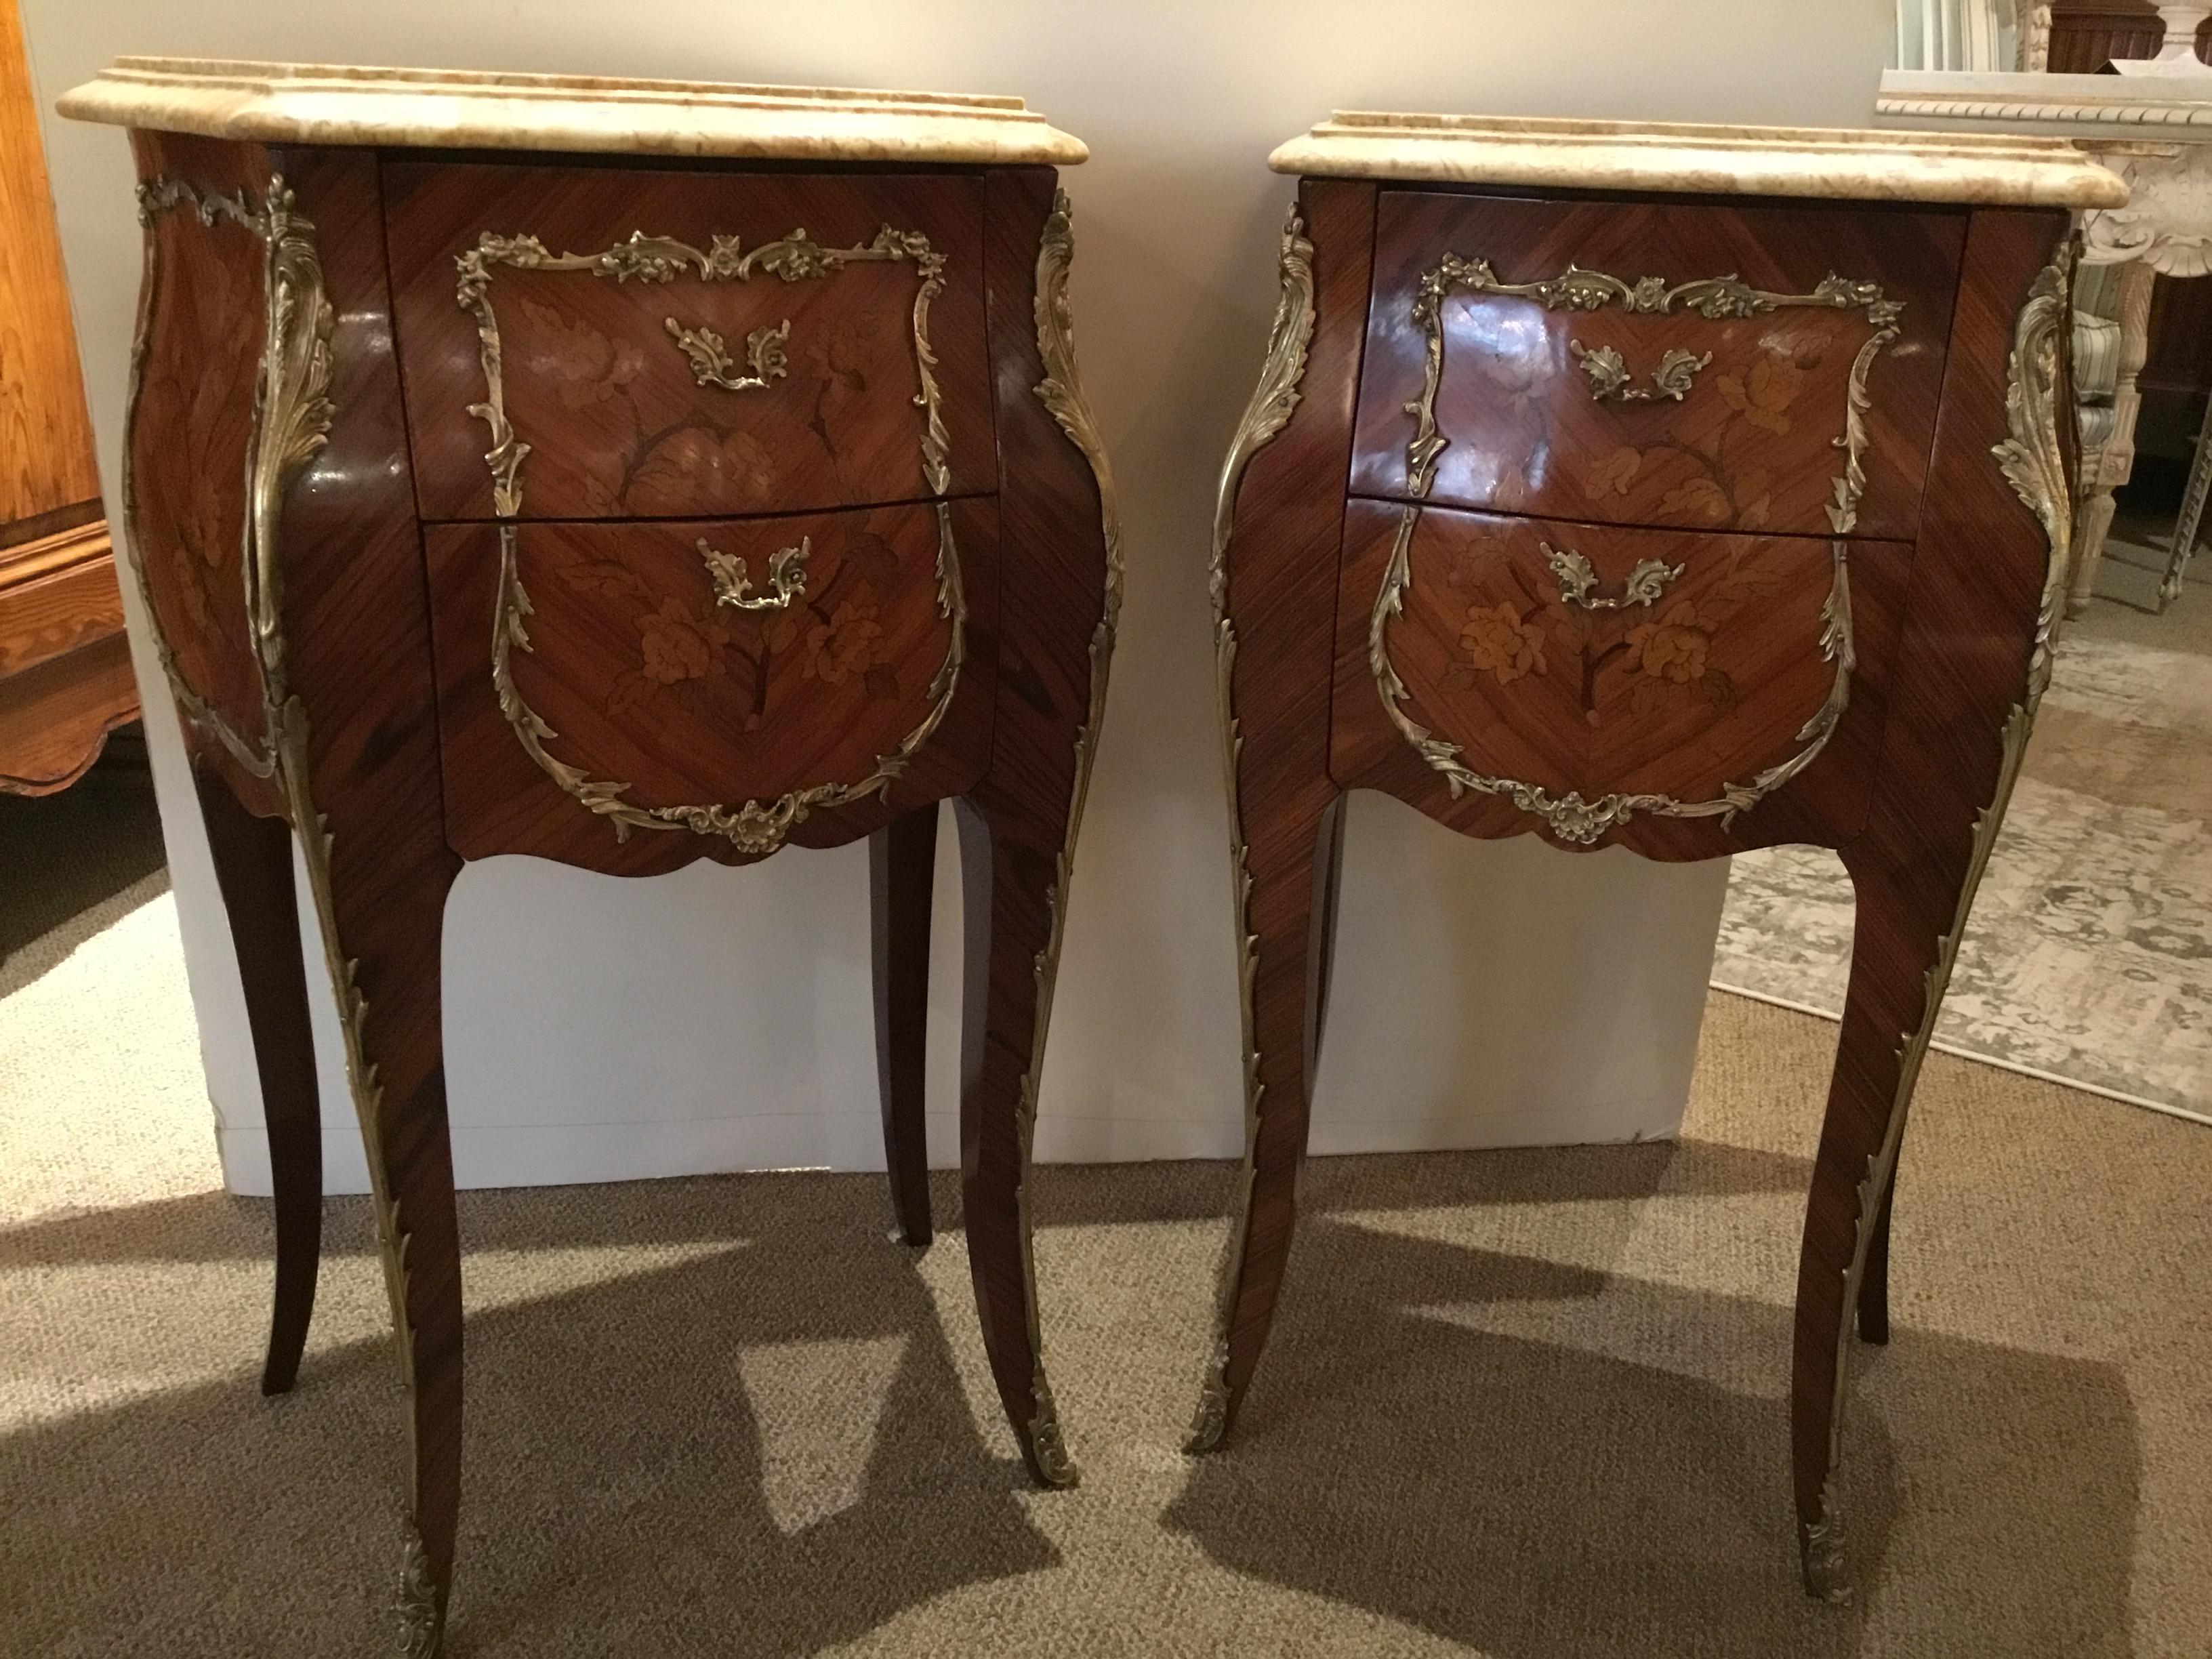 Pair of French Louis XV-style cream marble top nightstands, 20th century, shaped marble top with
molded edge, over case with floral marquetry, gilt metal mounts, fitted with two drawers,
rising on French bracket feet.